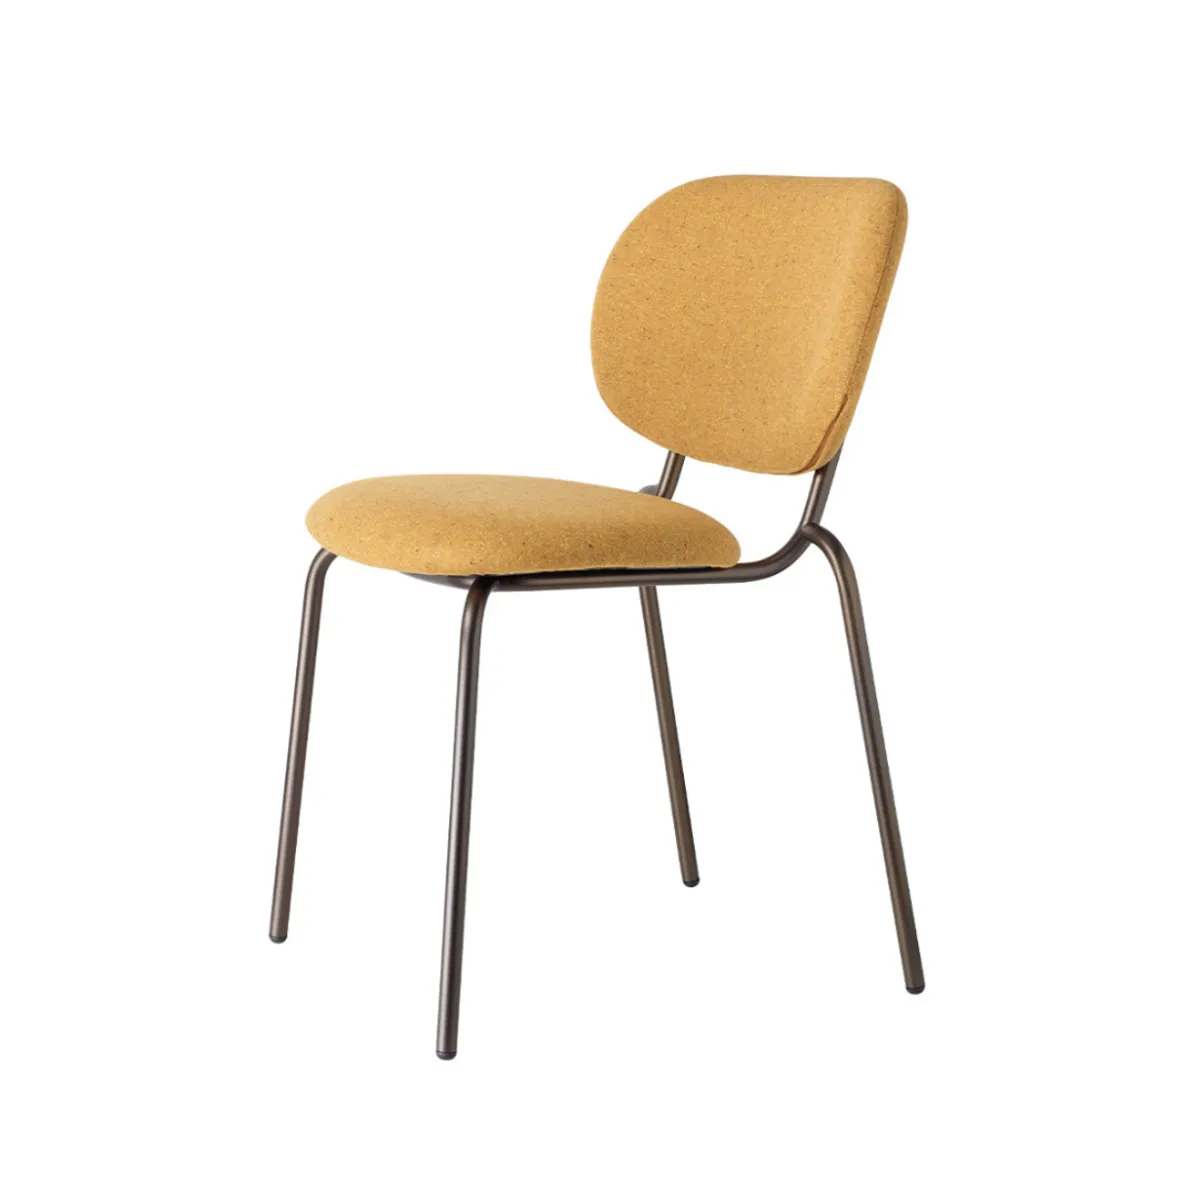 Layla soft side chair 2